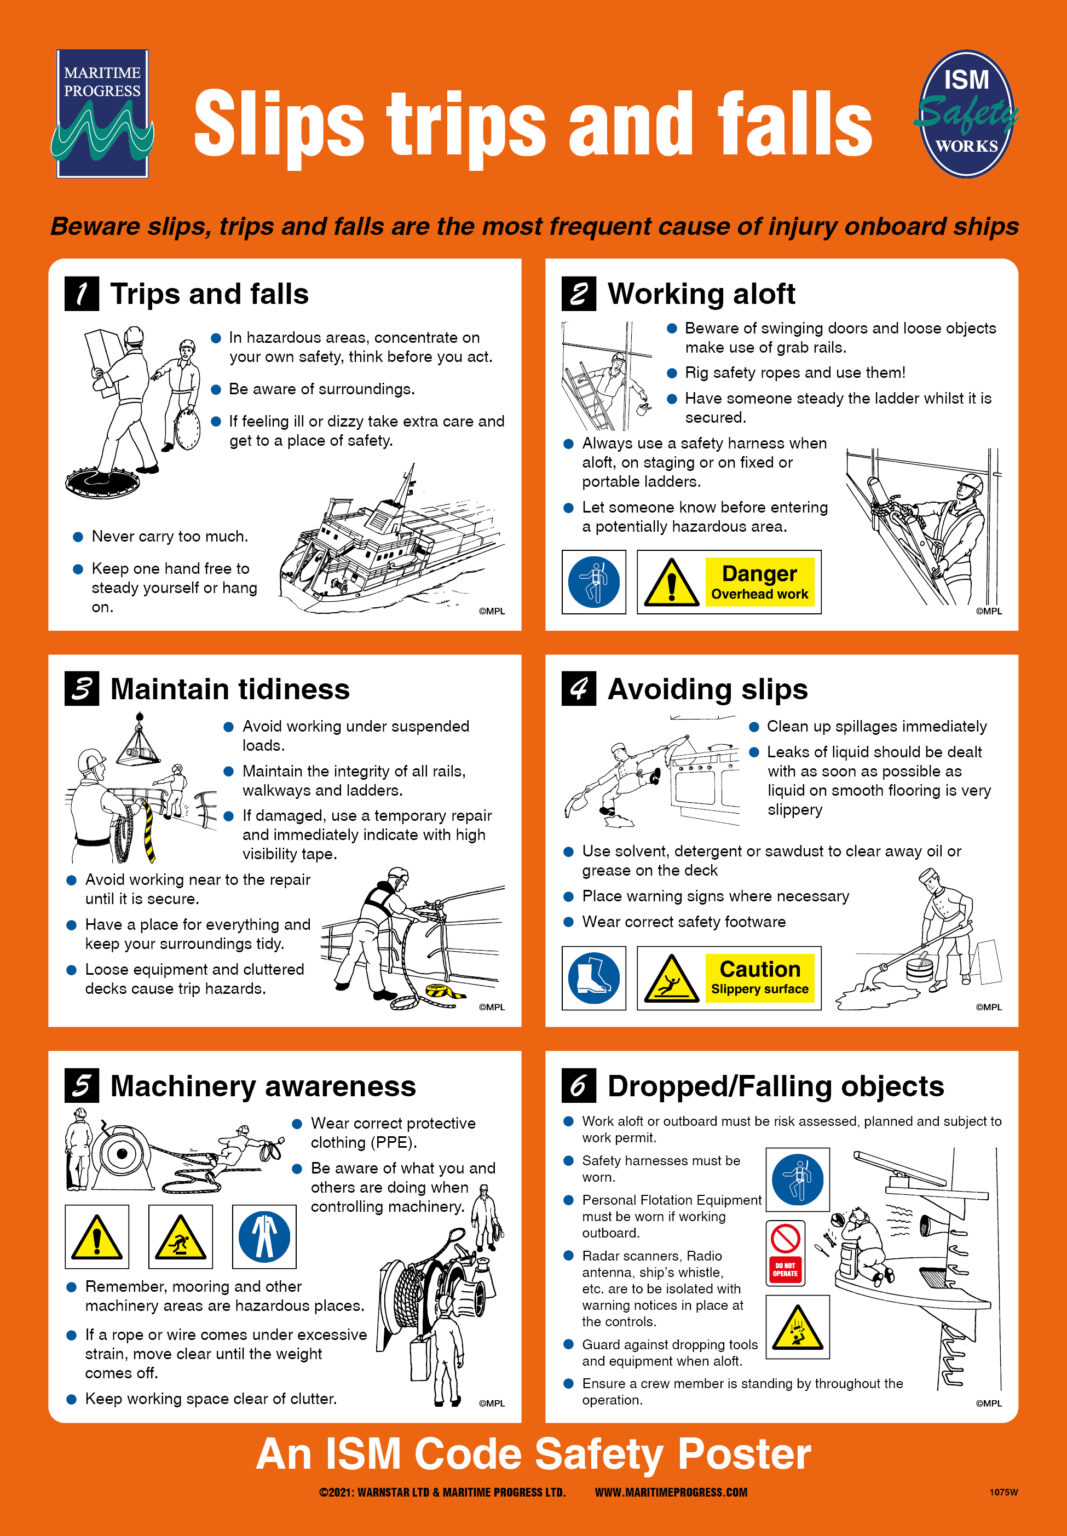 Maritime Progress Releases New Slips Trips And Falls Poster Designed Specifically For Maritime